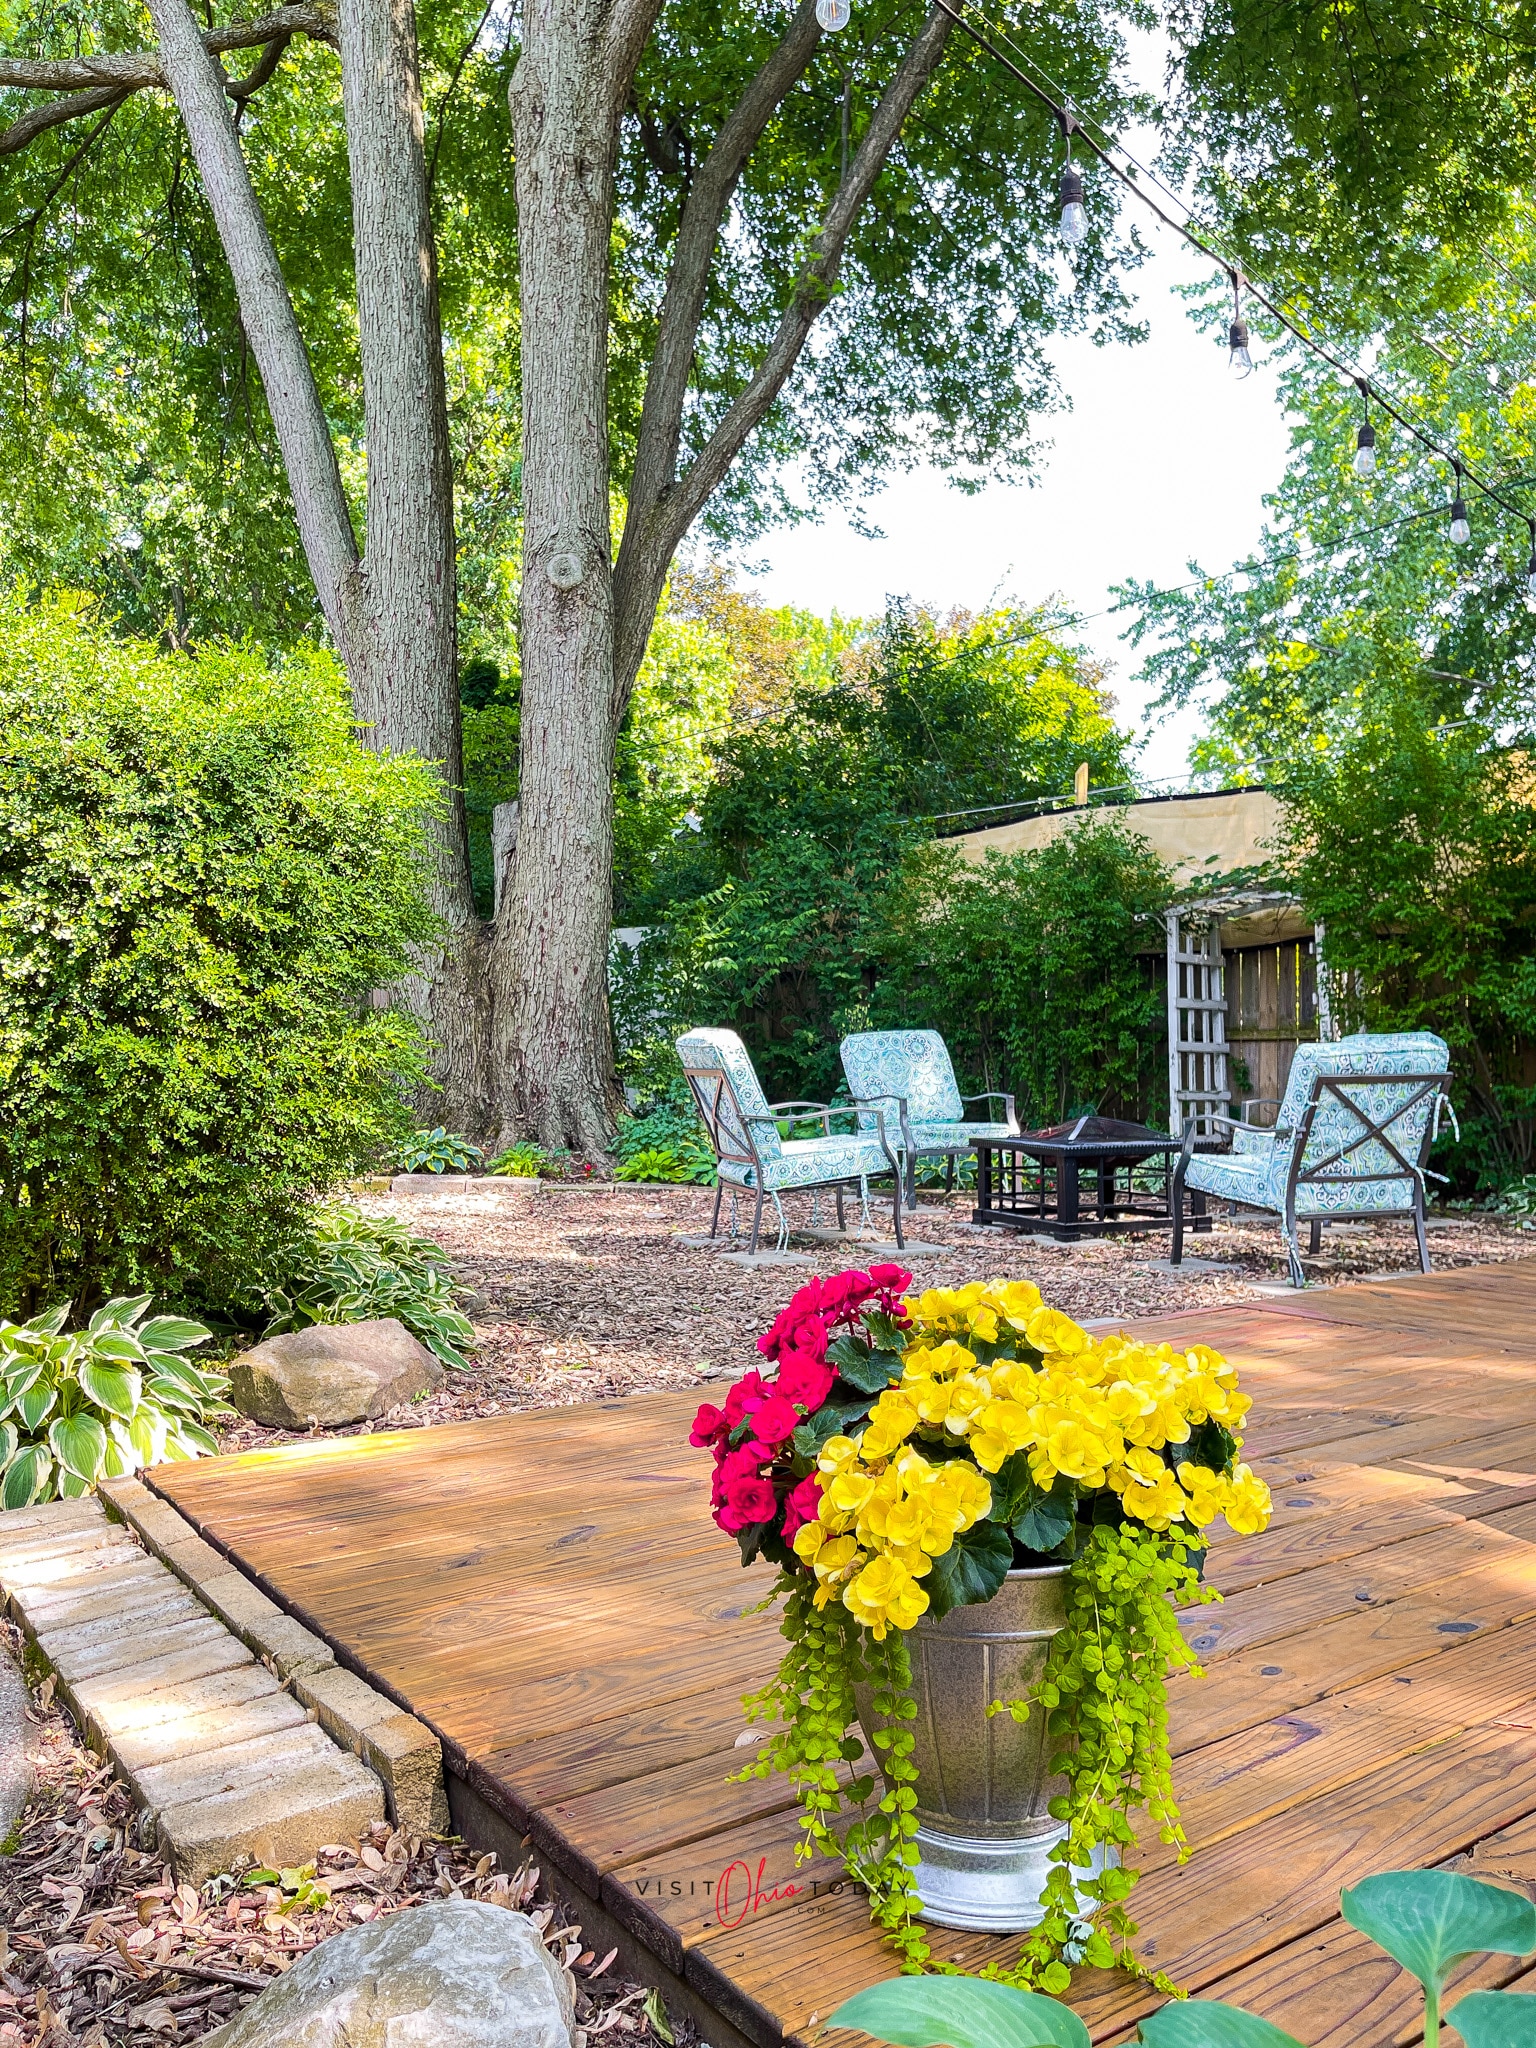 backyard oasis, wooden deck with colorful potted flowers and mulched fire pit area with four chairs Photo credit: Cindy Gordon of VisitOhioToday.com